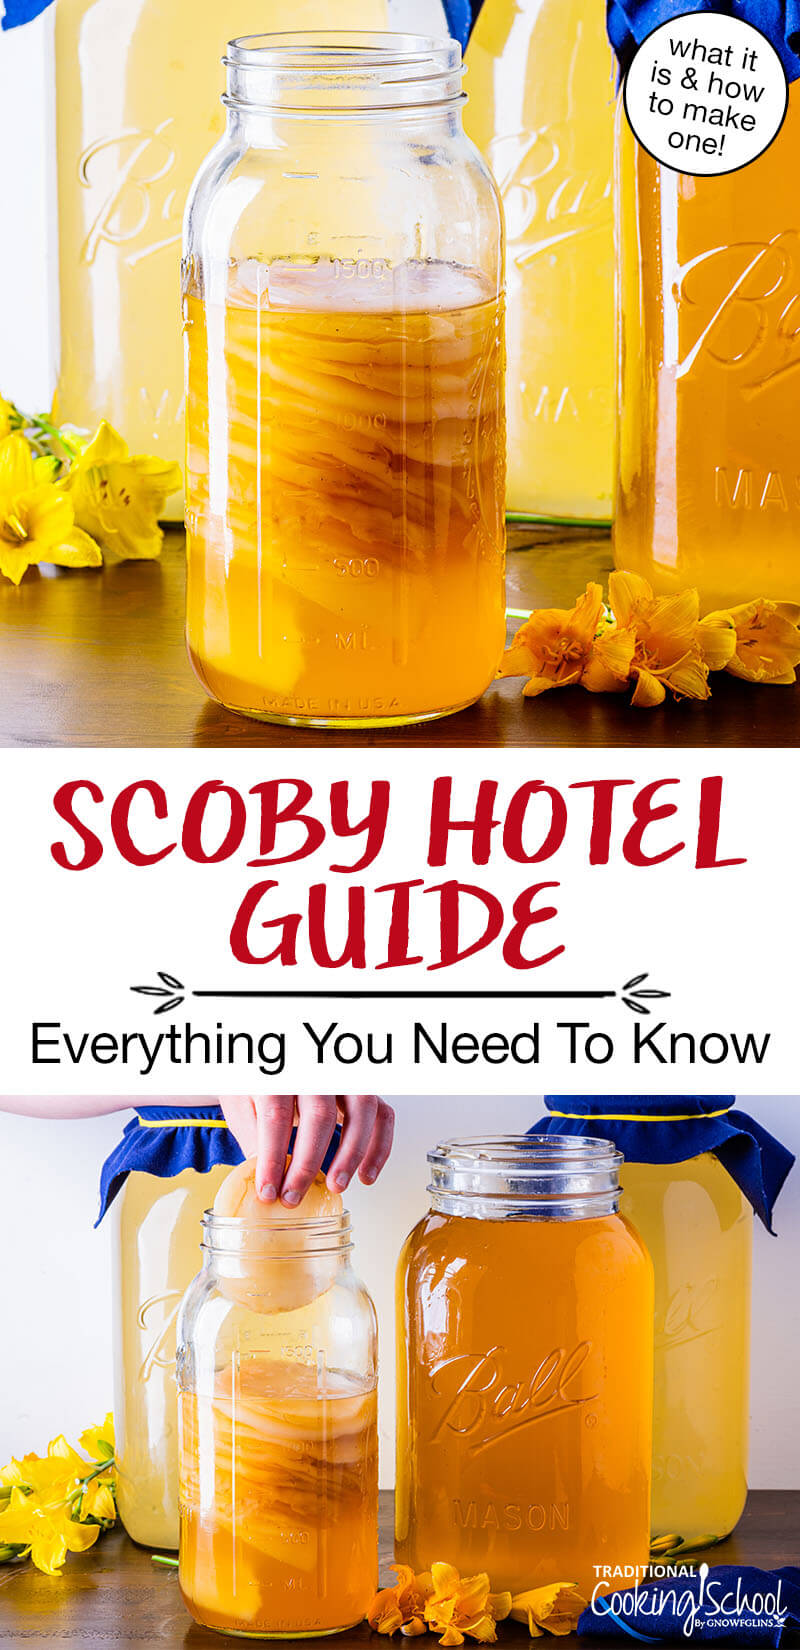 photo collage of a 1/2 gallon glass jar of Kombucha SCOBYS, and a hand putting a SCOBY inside the jar with jars of finished Kombucha in the background. Text overlay says: "SCOBY Hotel Guide: Everything You Need To Know (what it is & how to make one!)